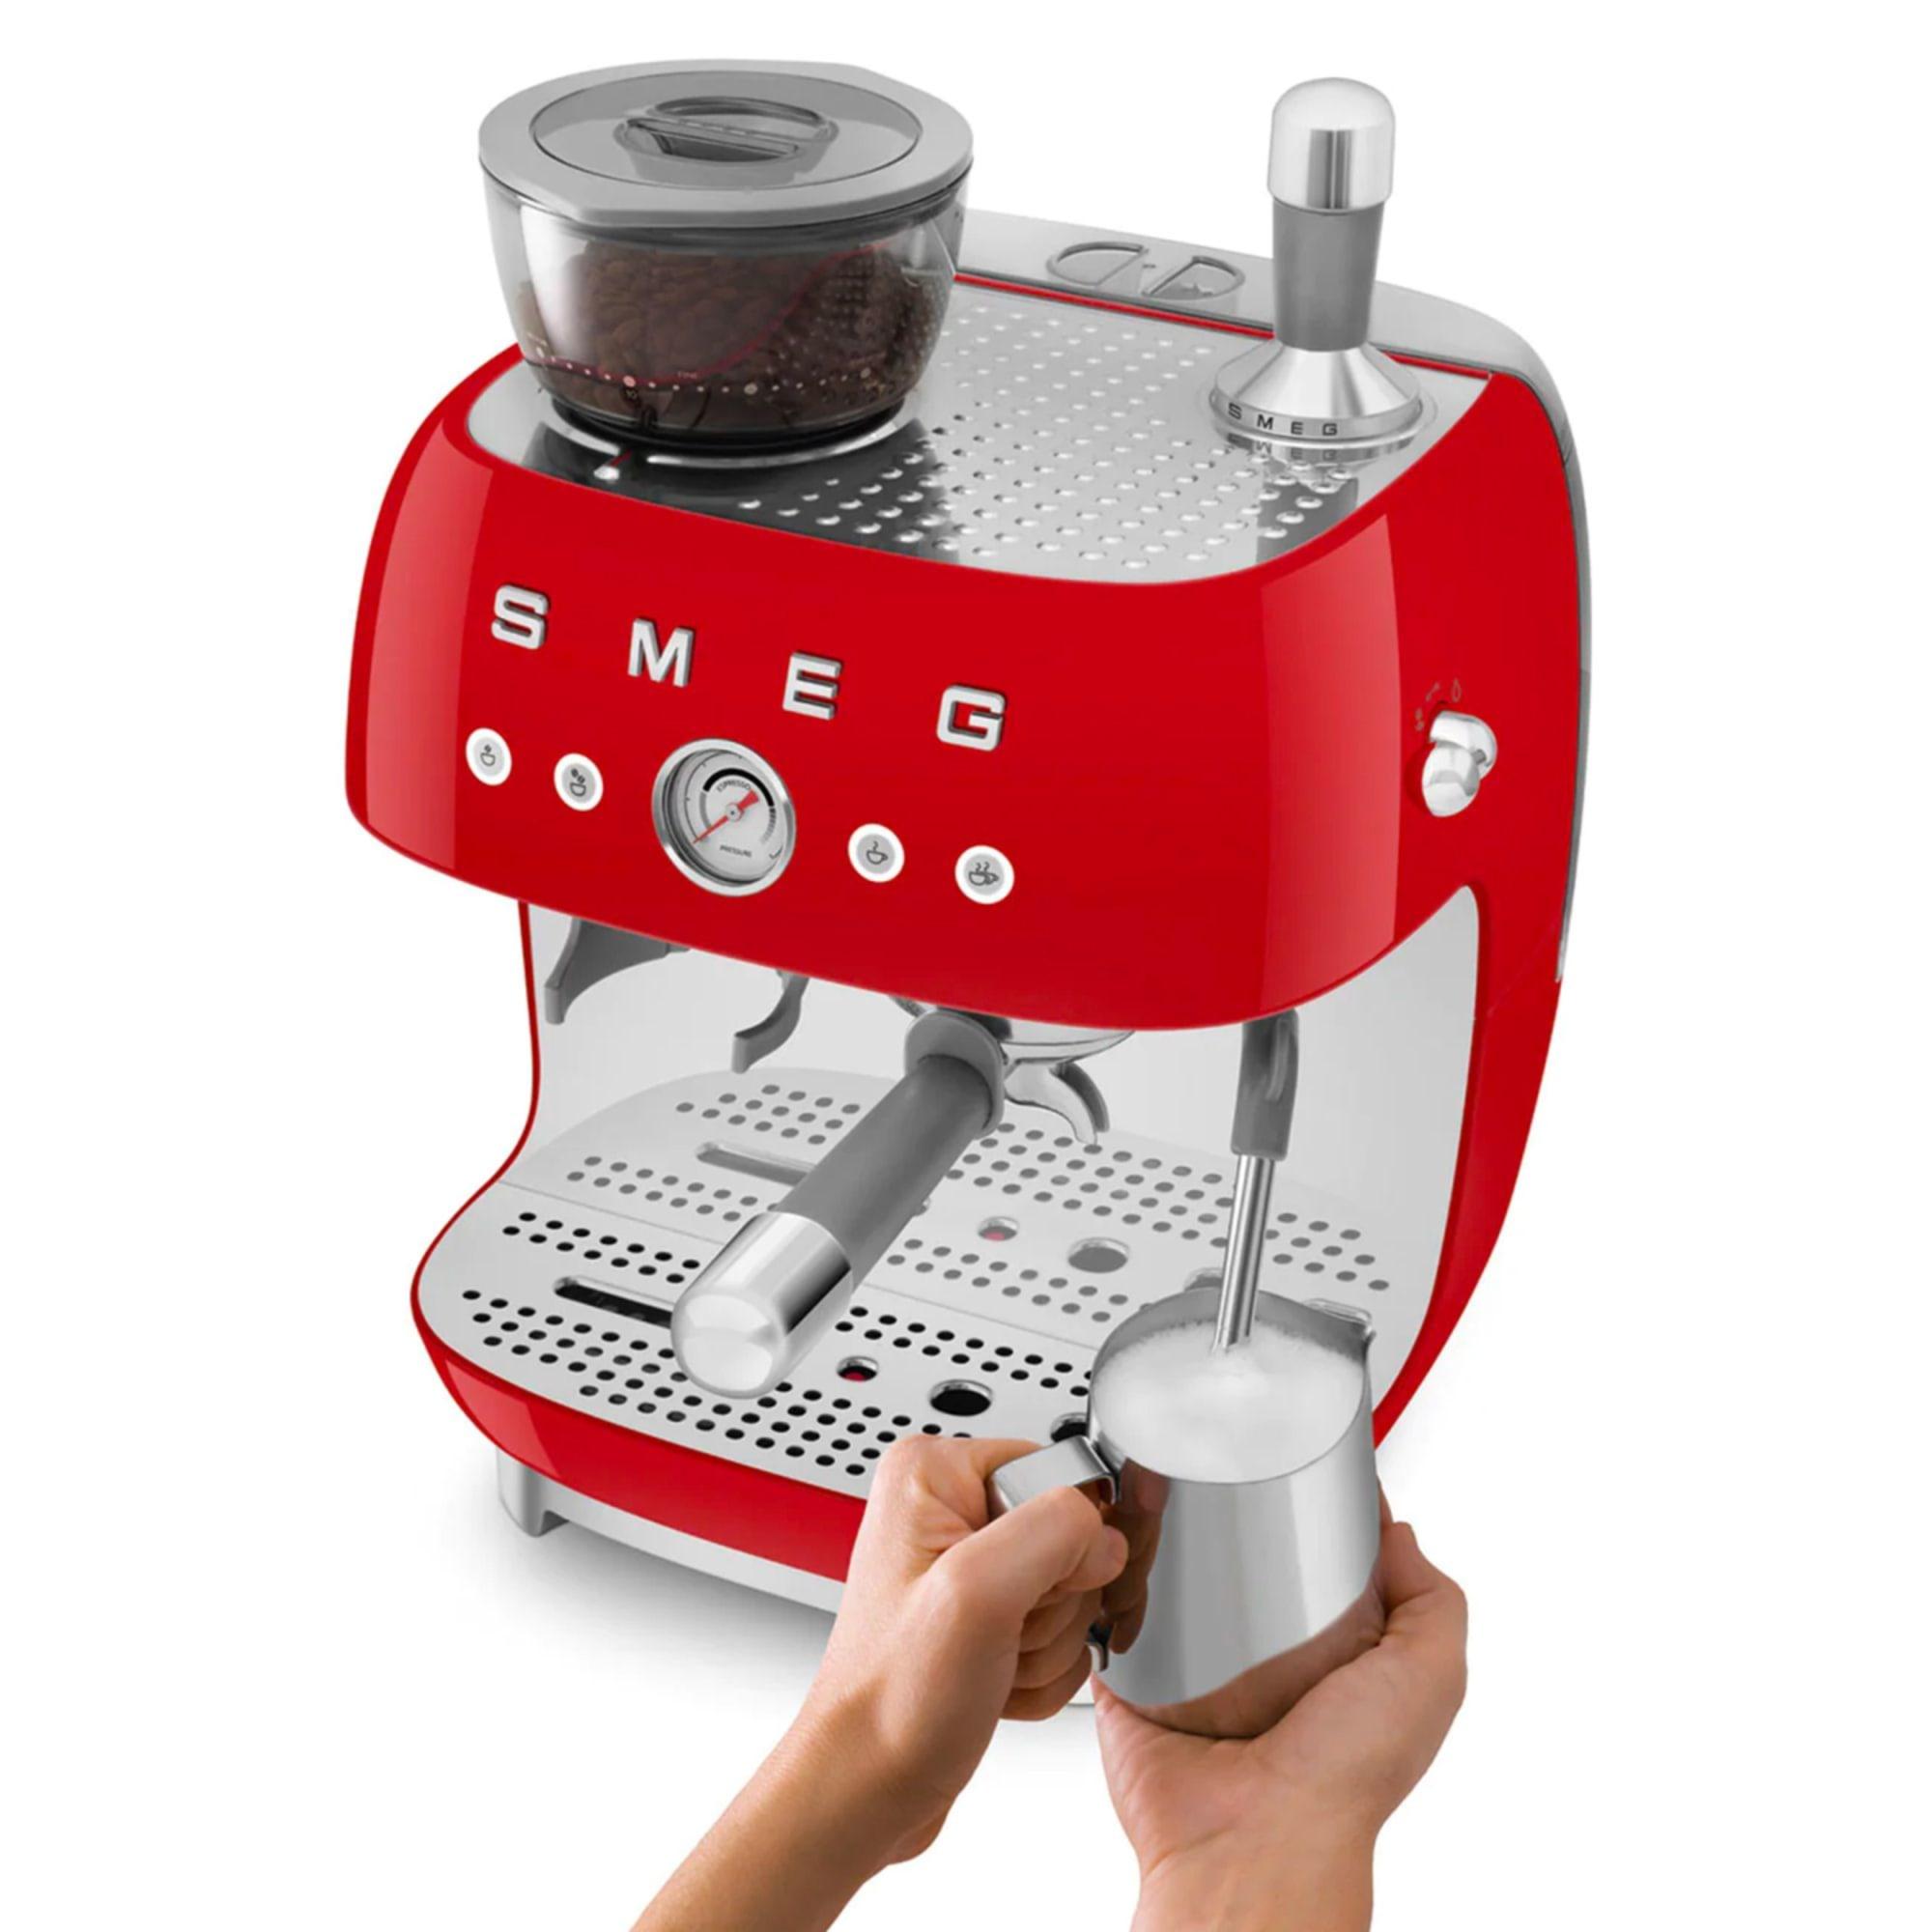 Smeg 50's Retro Style Espresso Machine with Built In Grinder Red Image 5